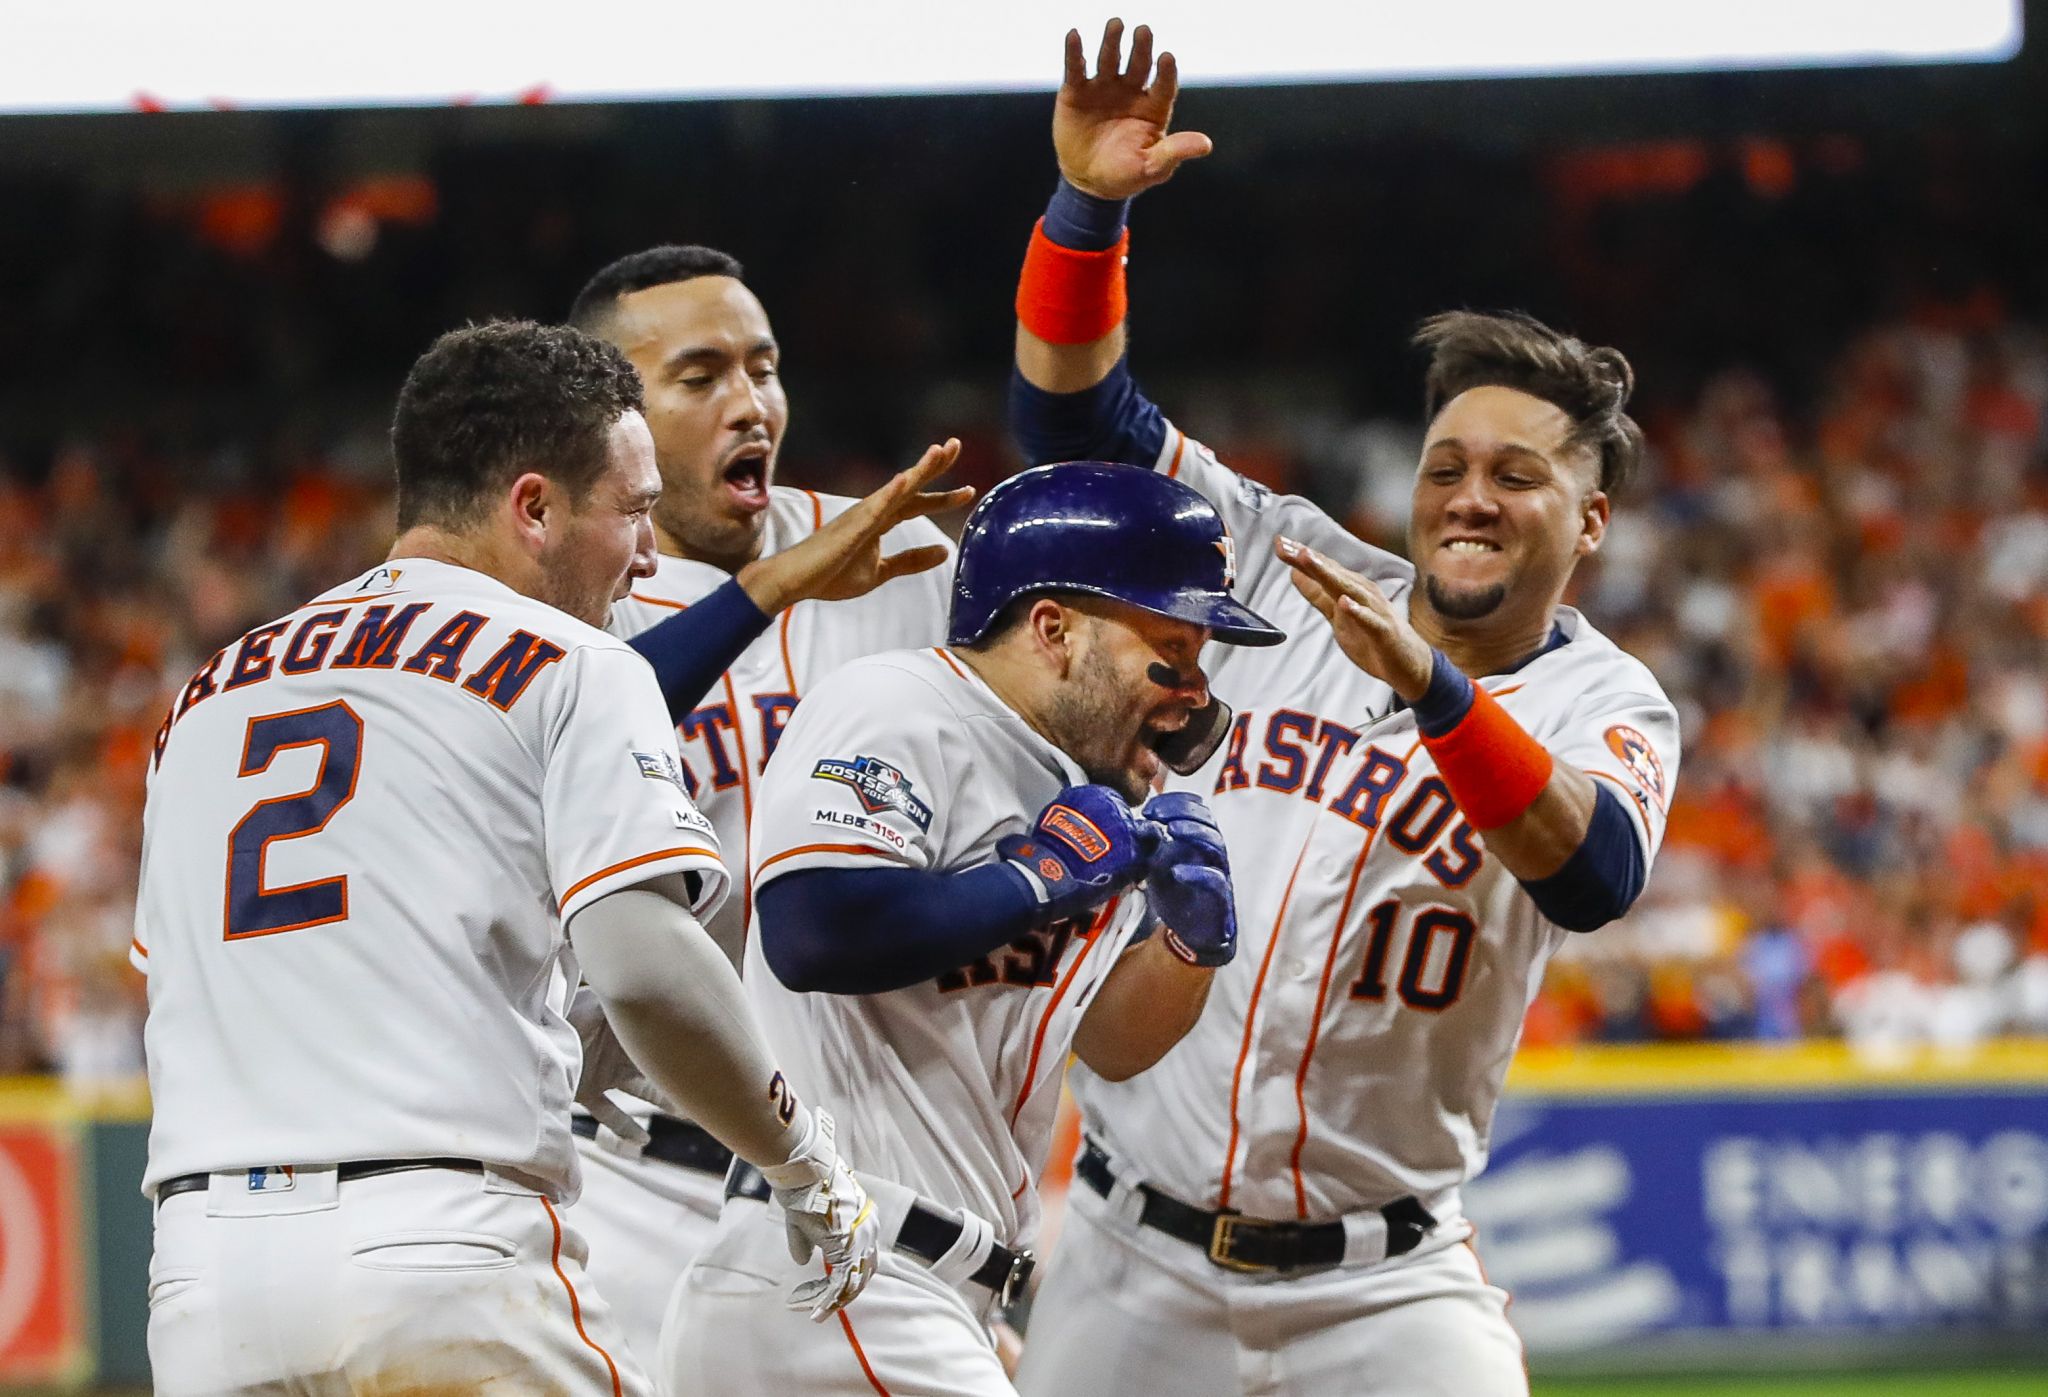 George Springer, Astros beat Rays to force Game 7 in ALCS - Los